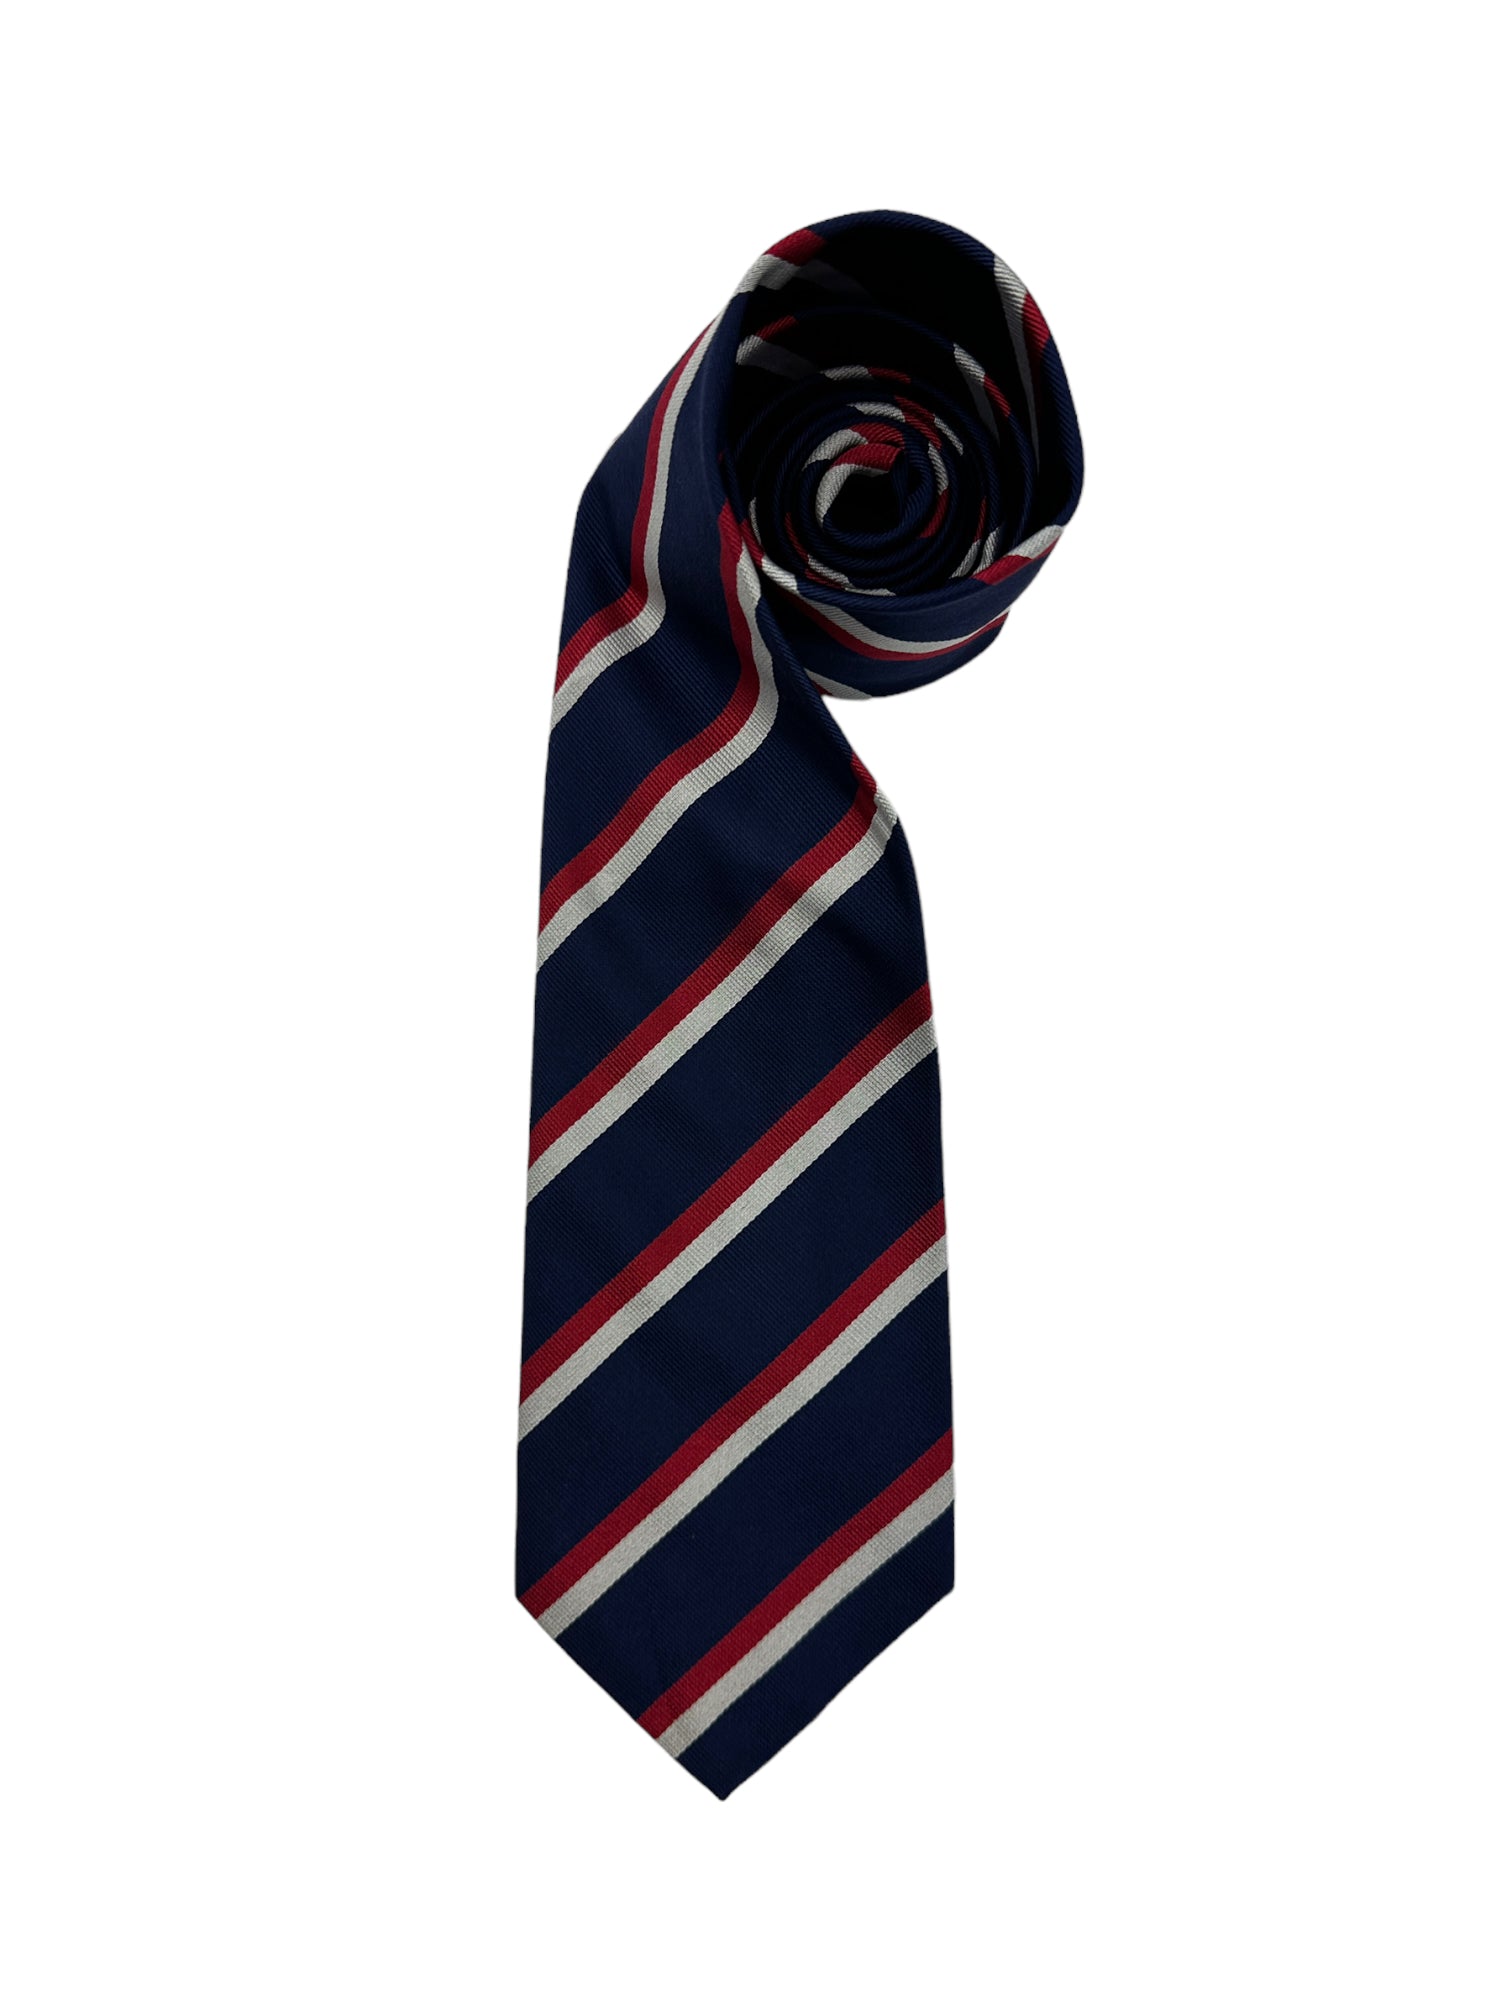 E.Marinella Navy and Red Club Tie